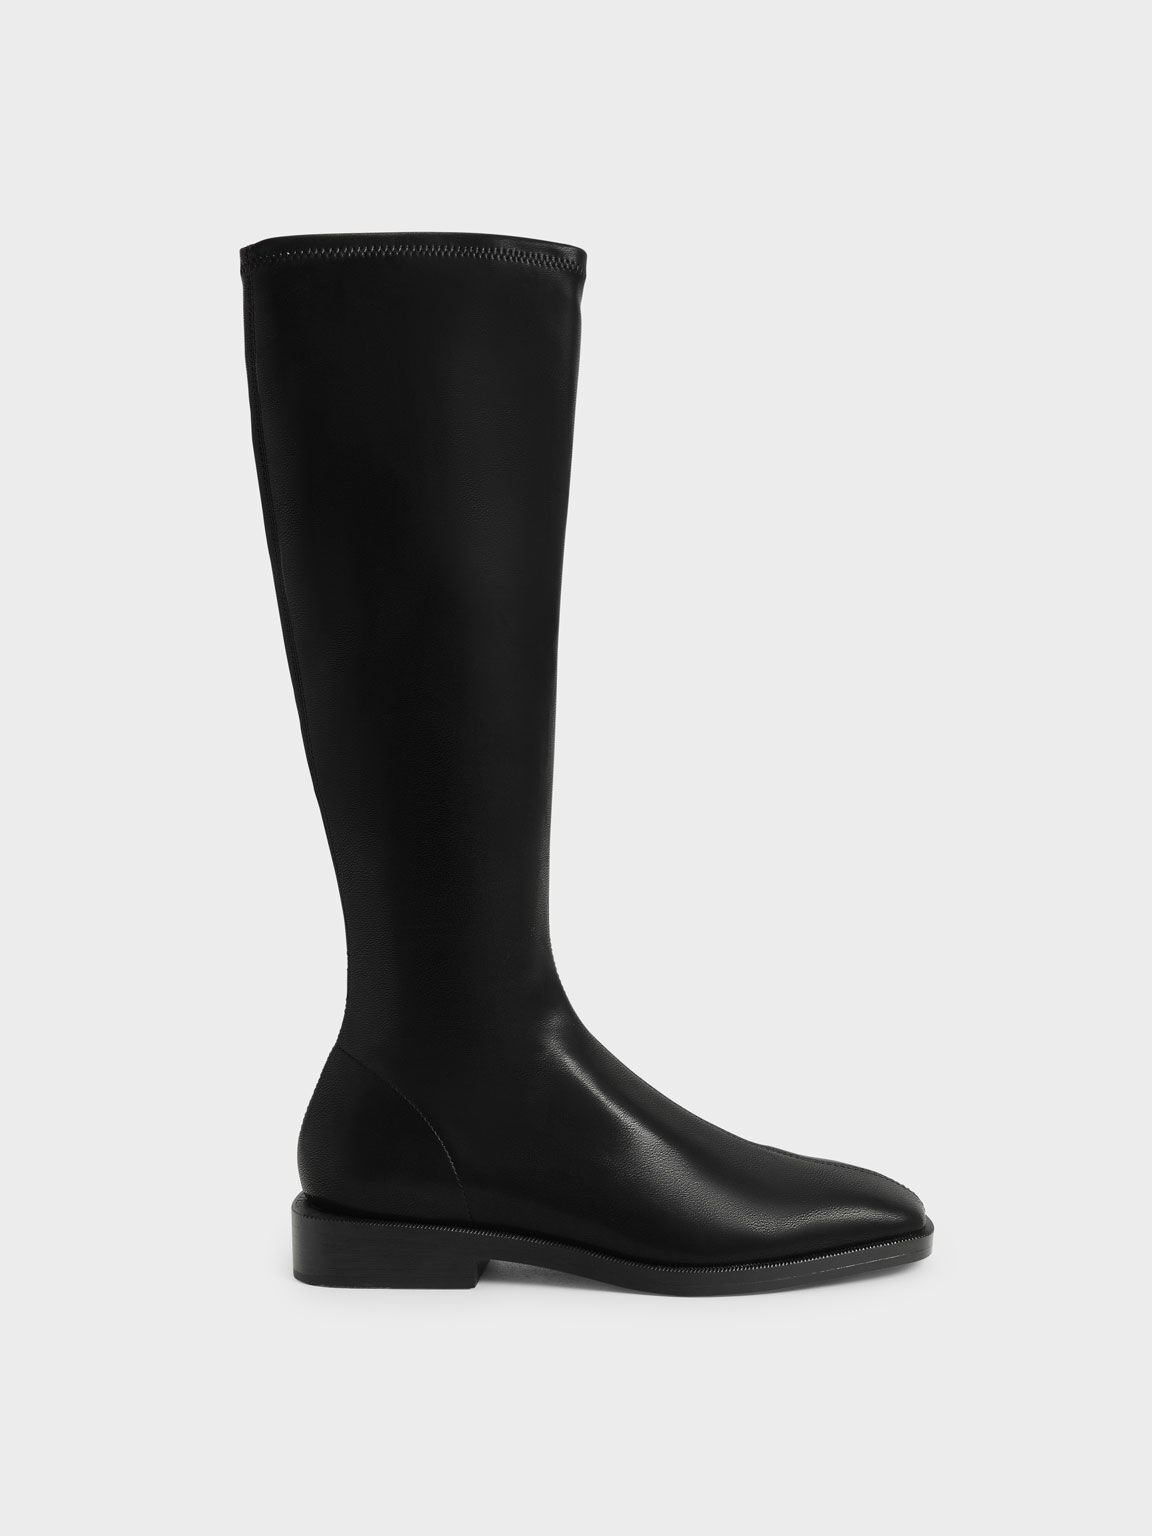 Ideally Precede trader Black Knee High Flat Boots - CHARLES & KEITH US